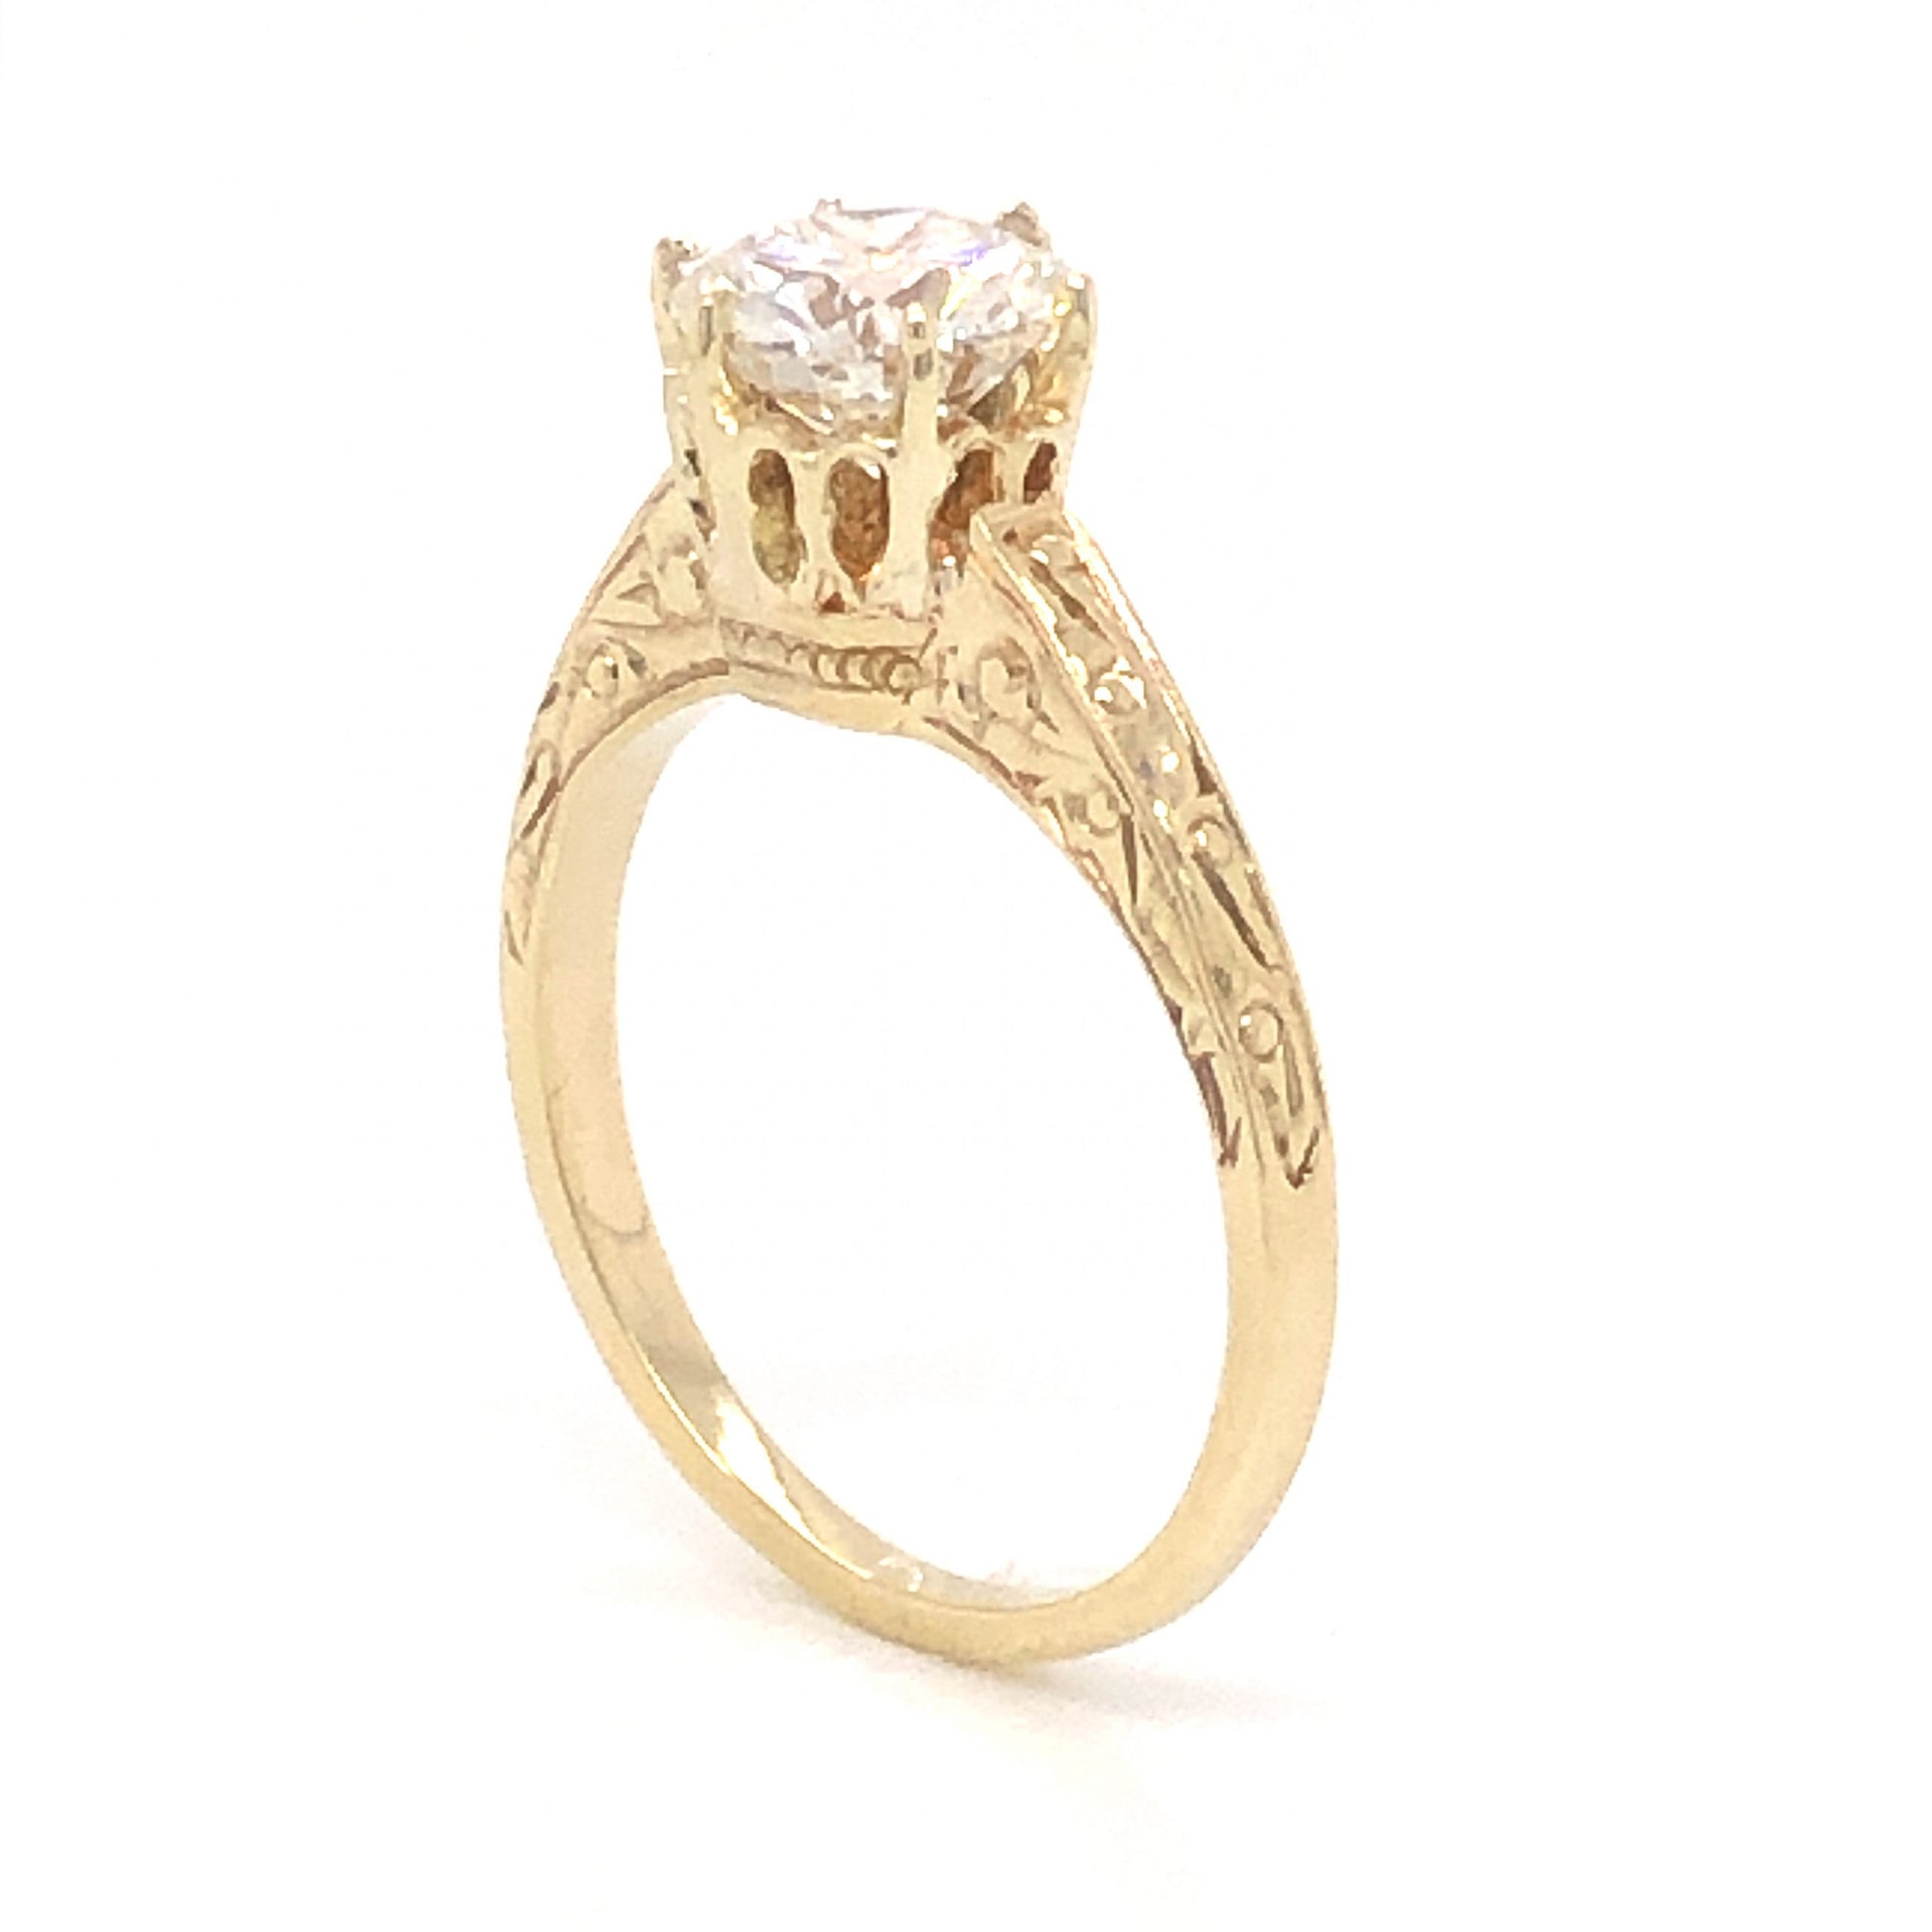 Late Art Deco 1.23 Diamond Engagement Ring in 14k Yellow GoldComposition: Platinum Ring Size: 6 Total Diamond Weight: 1.23ct Total Gram Weight: 2.7 g Inscription: B.L.
      